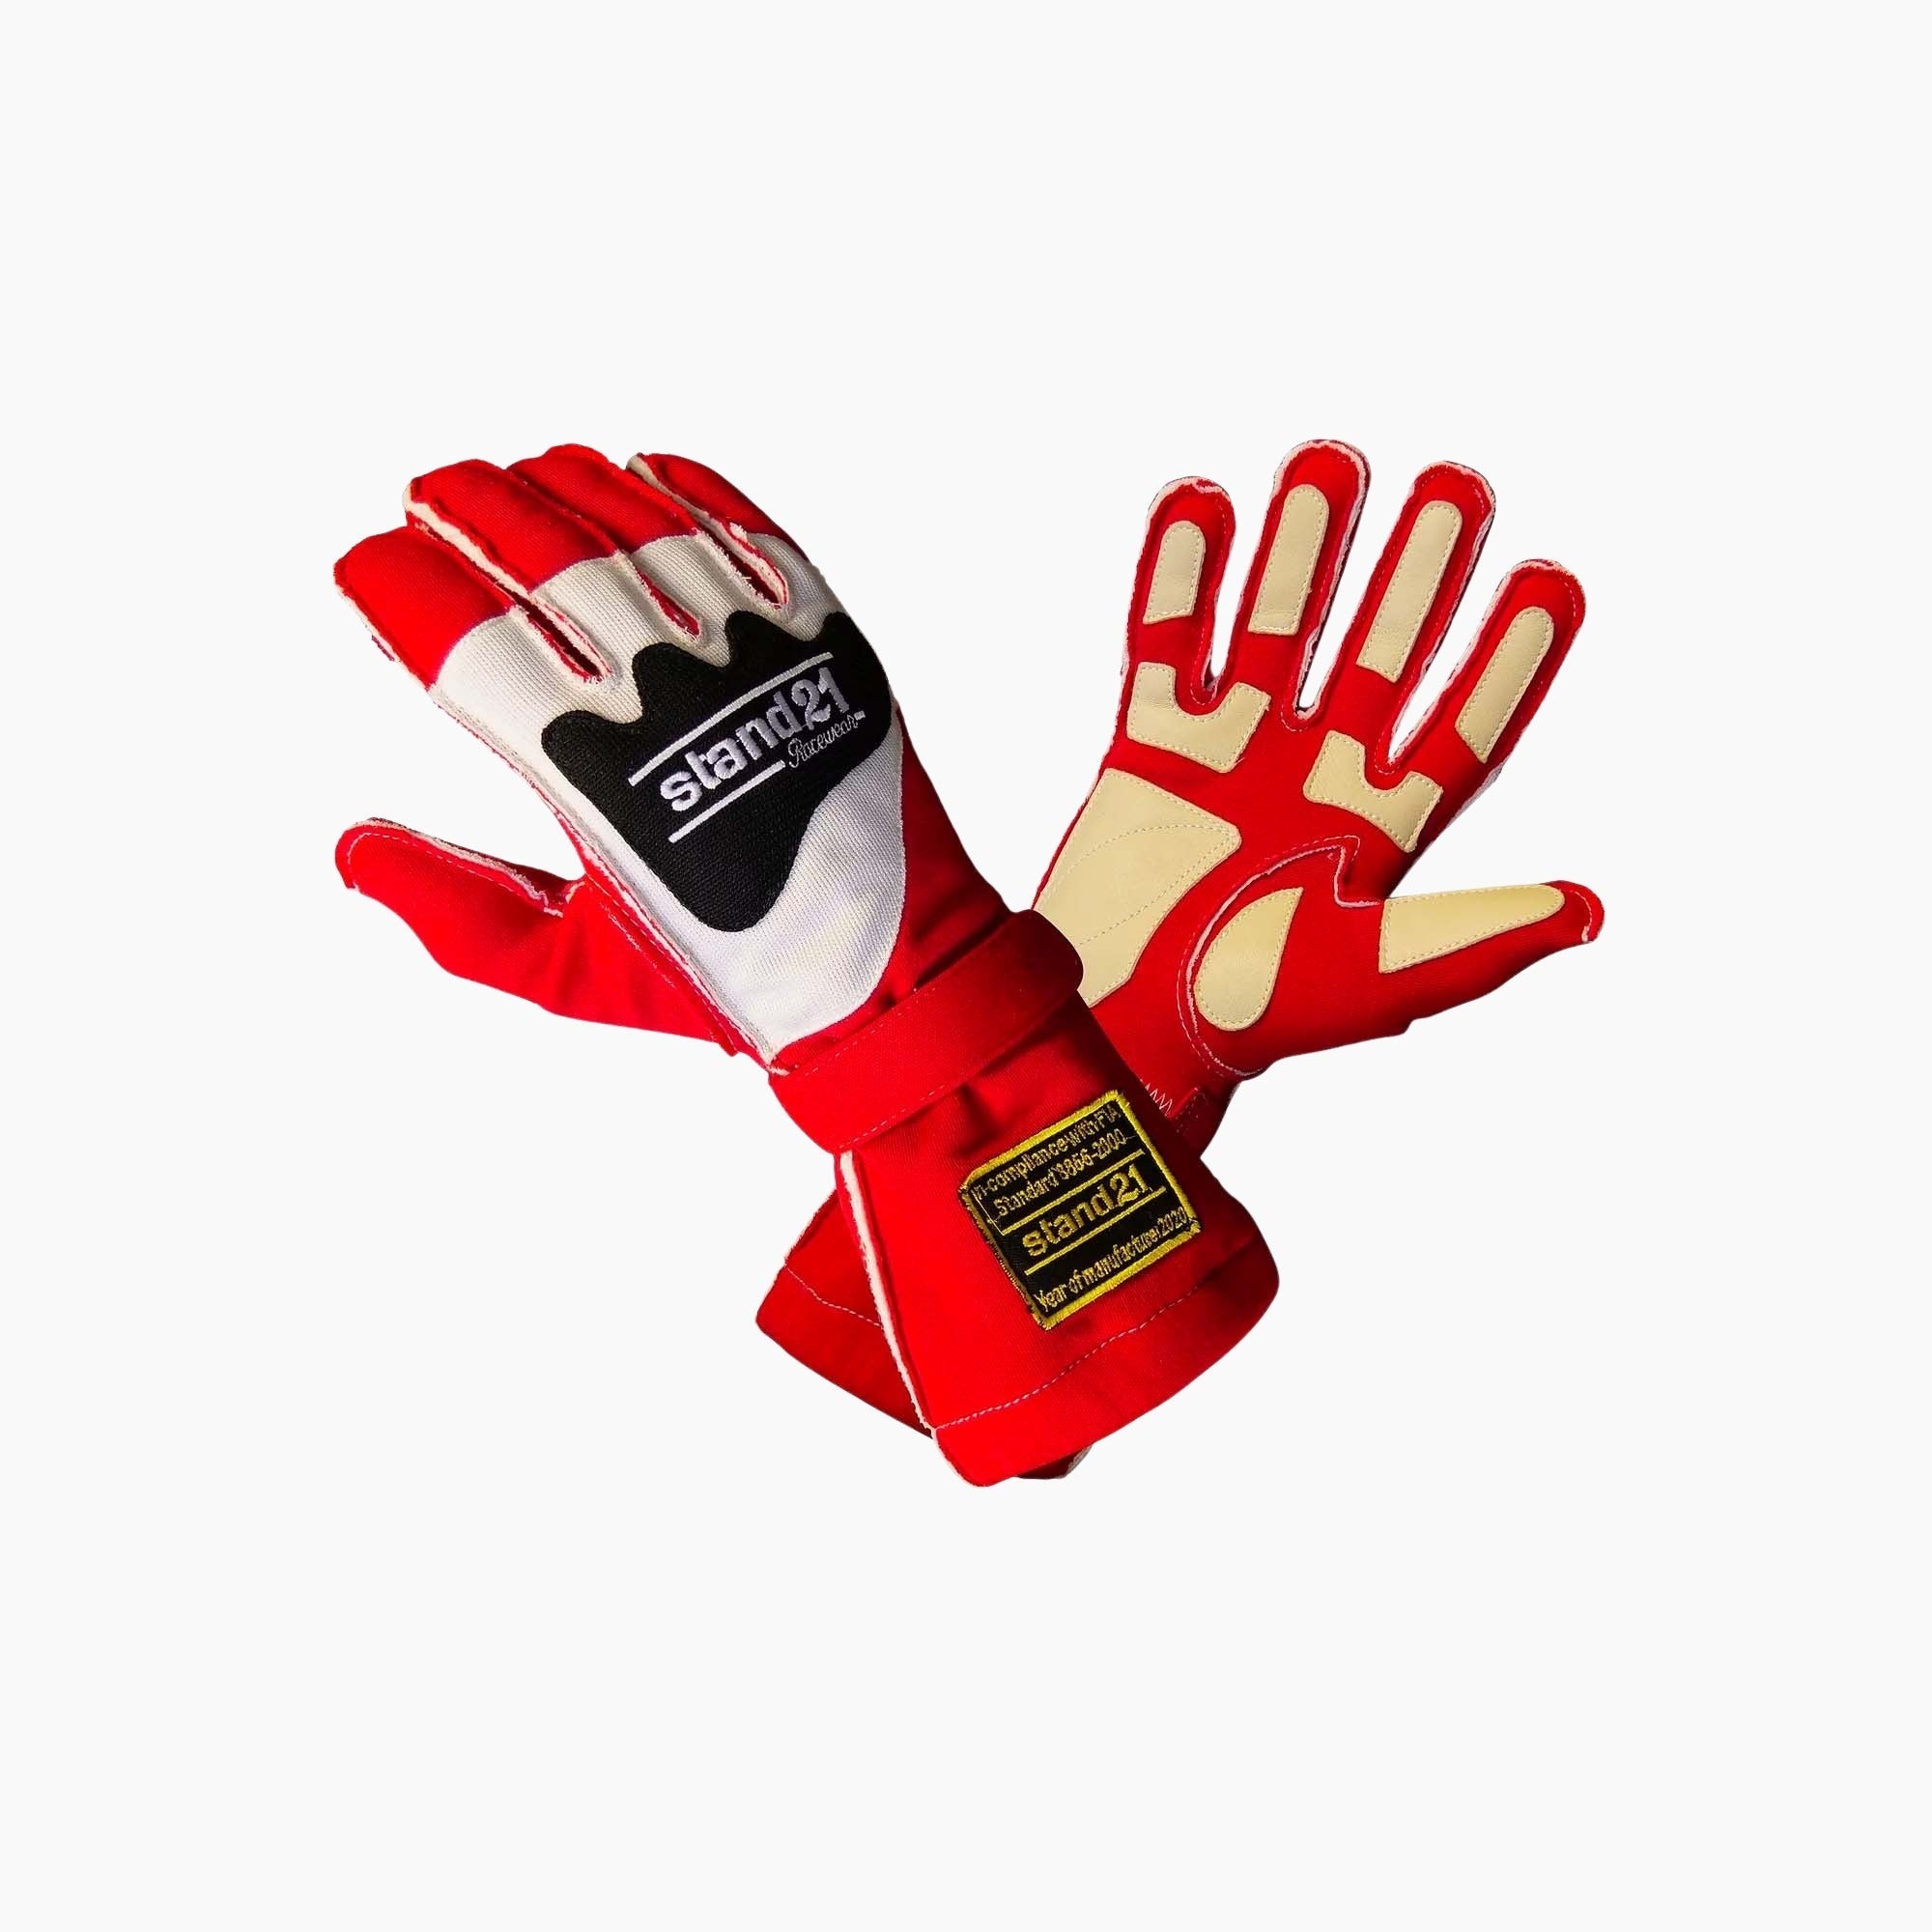 Stand 21 | Outside Seams II Racing Gloves-Racing Gloves-STAND 21-gpx-store